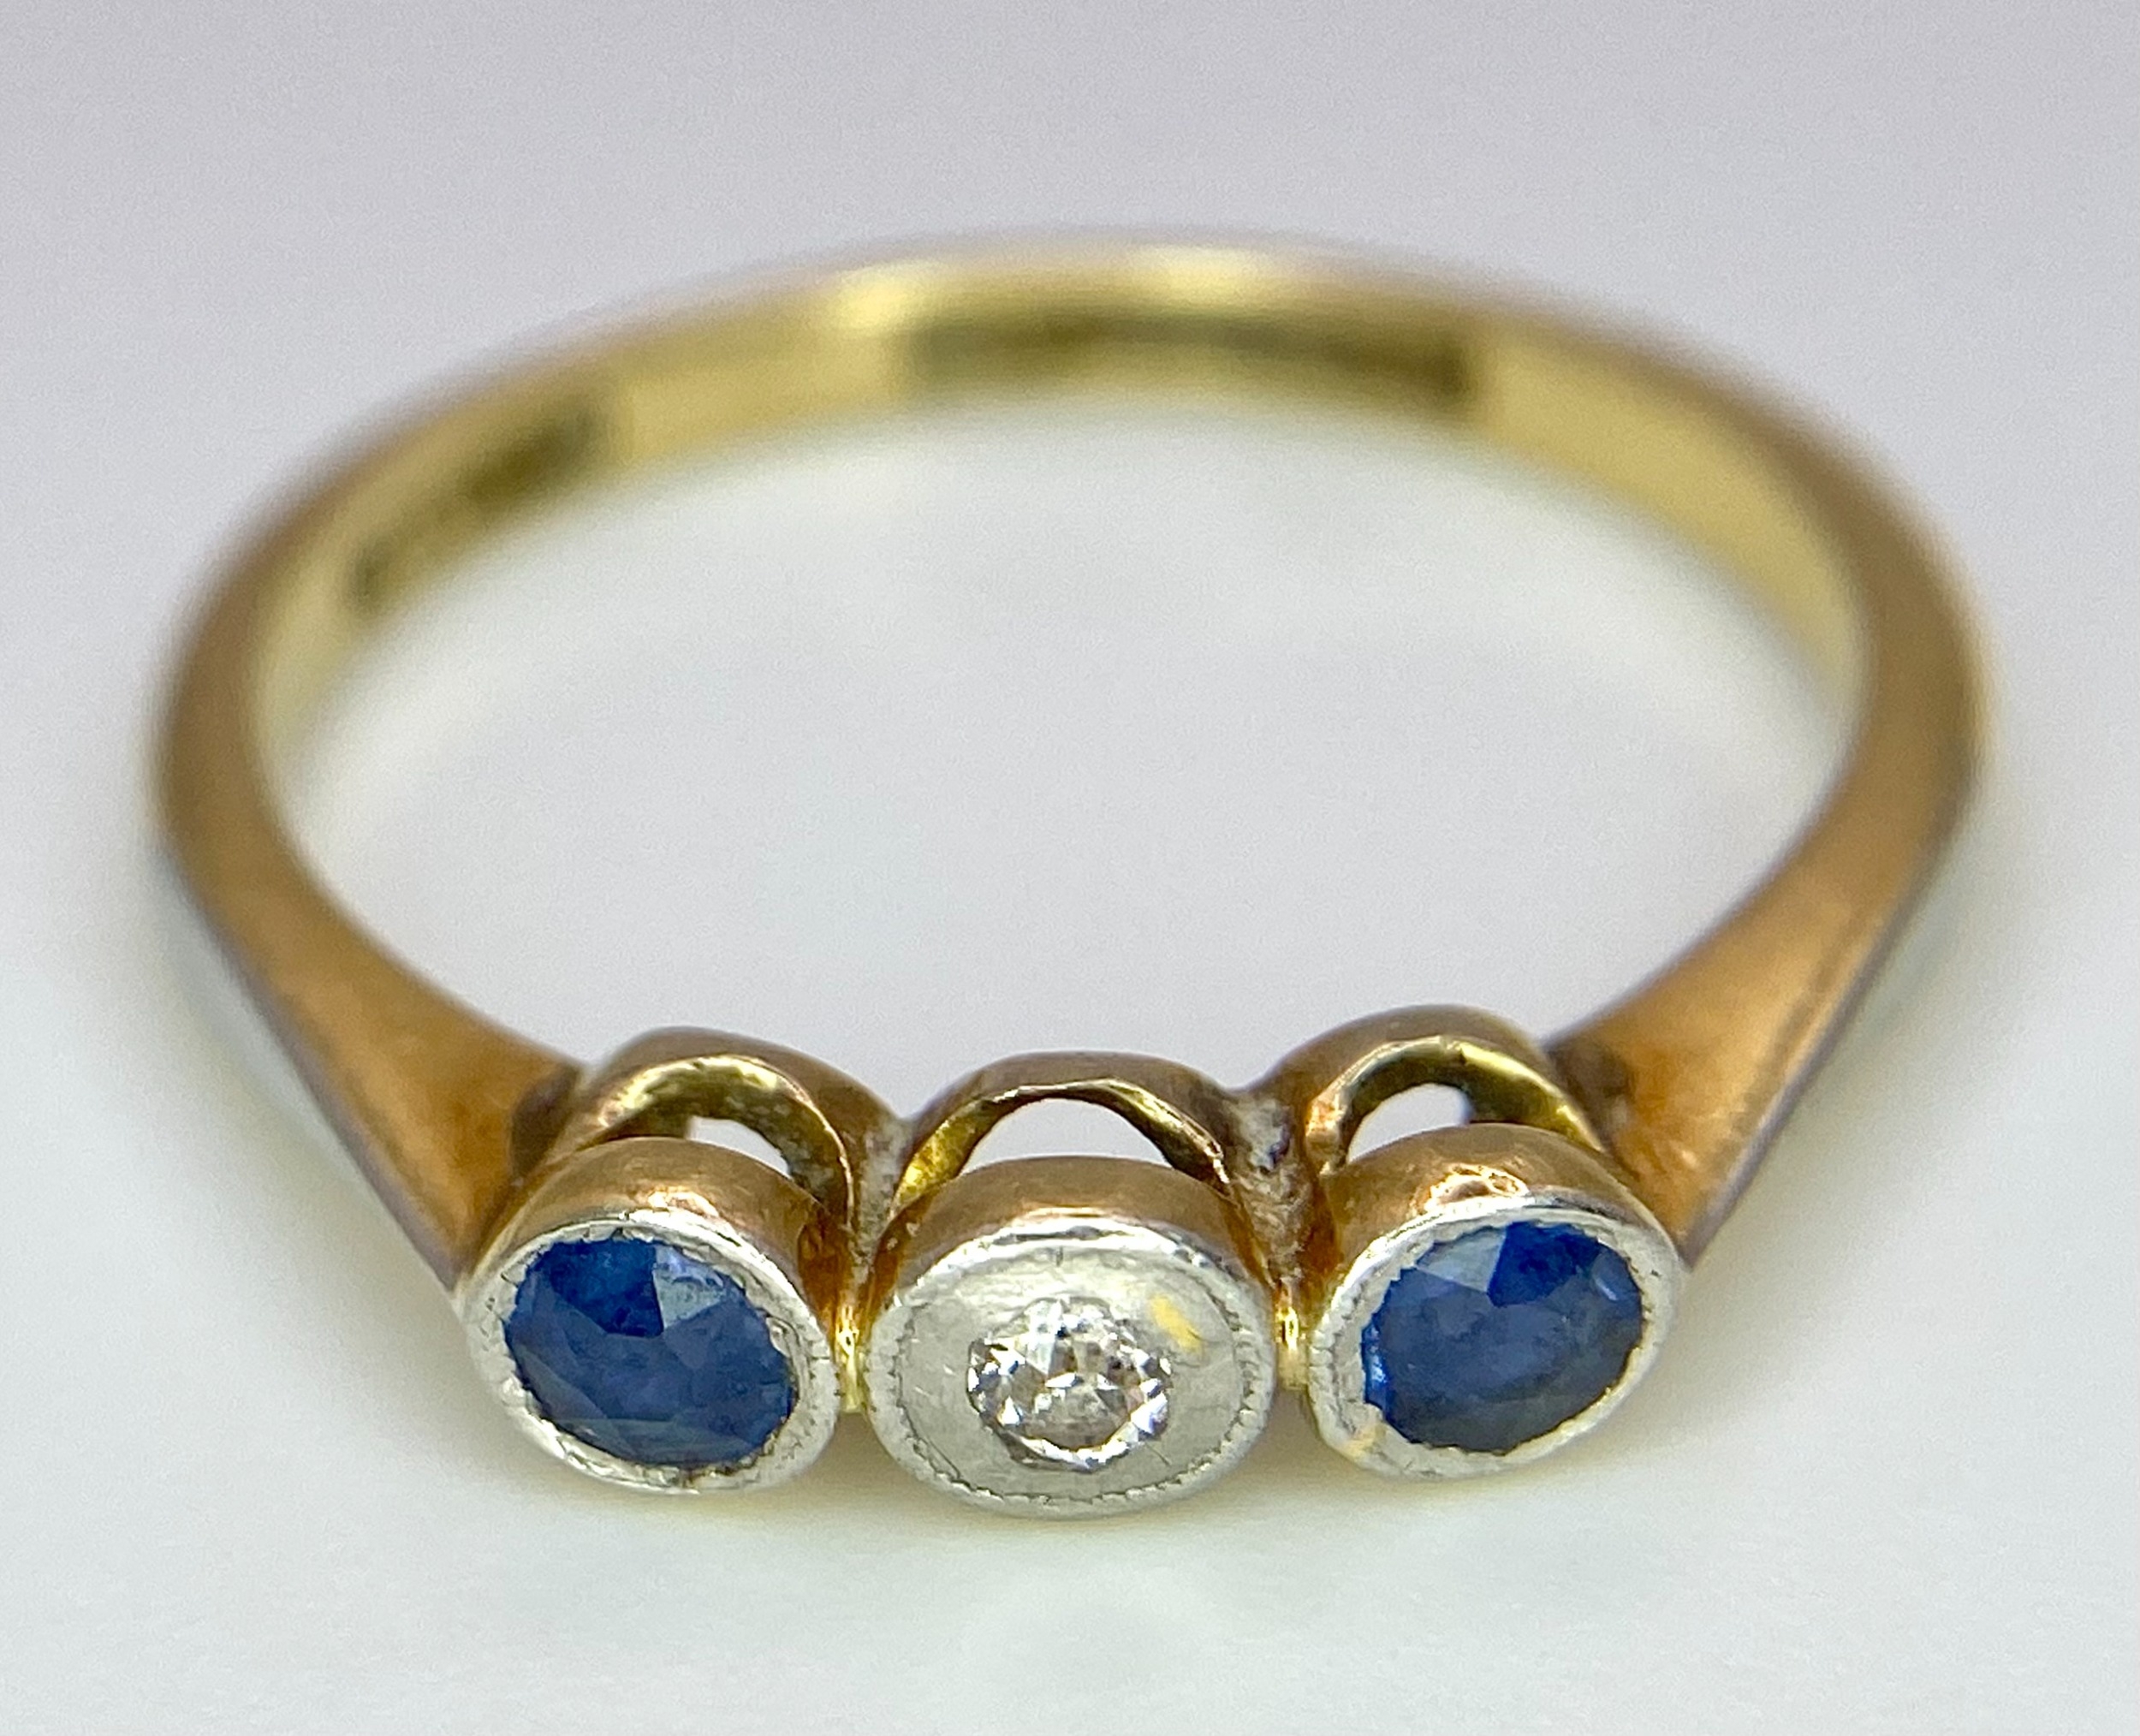 AN 18K YELLOW GOLD DIAMOND & SAPPHIRE 3 STONE RING. Size N, 2.6g total weight. Ref: SC 8059 - Image 3 of 7